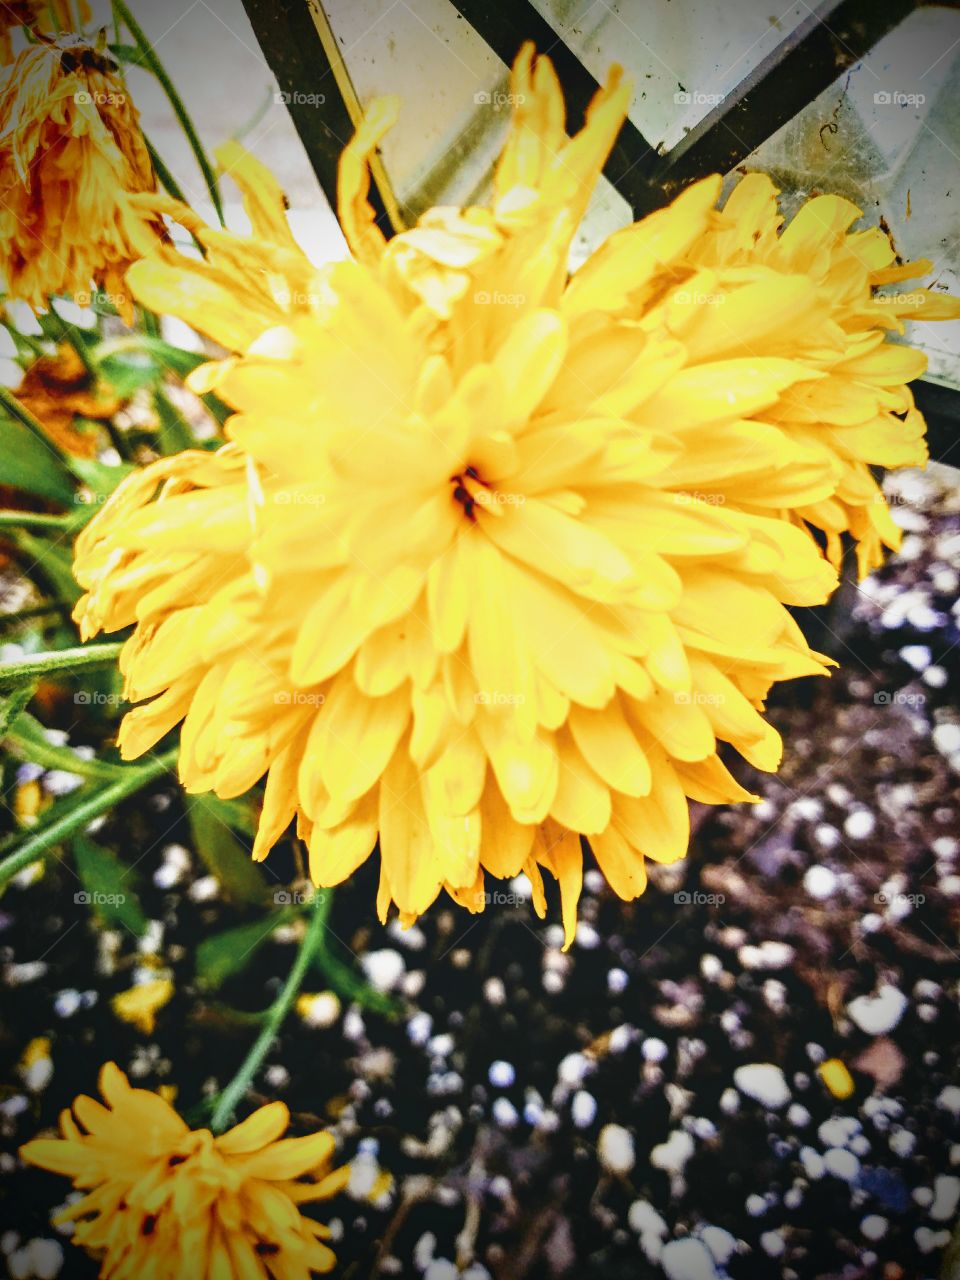 Pretty yellow flower in the fall.